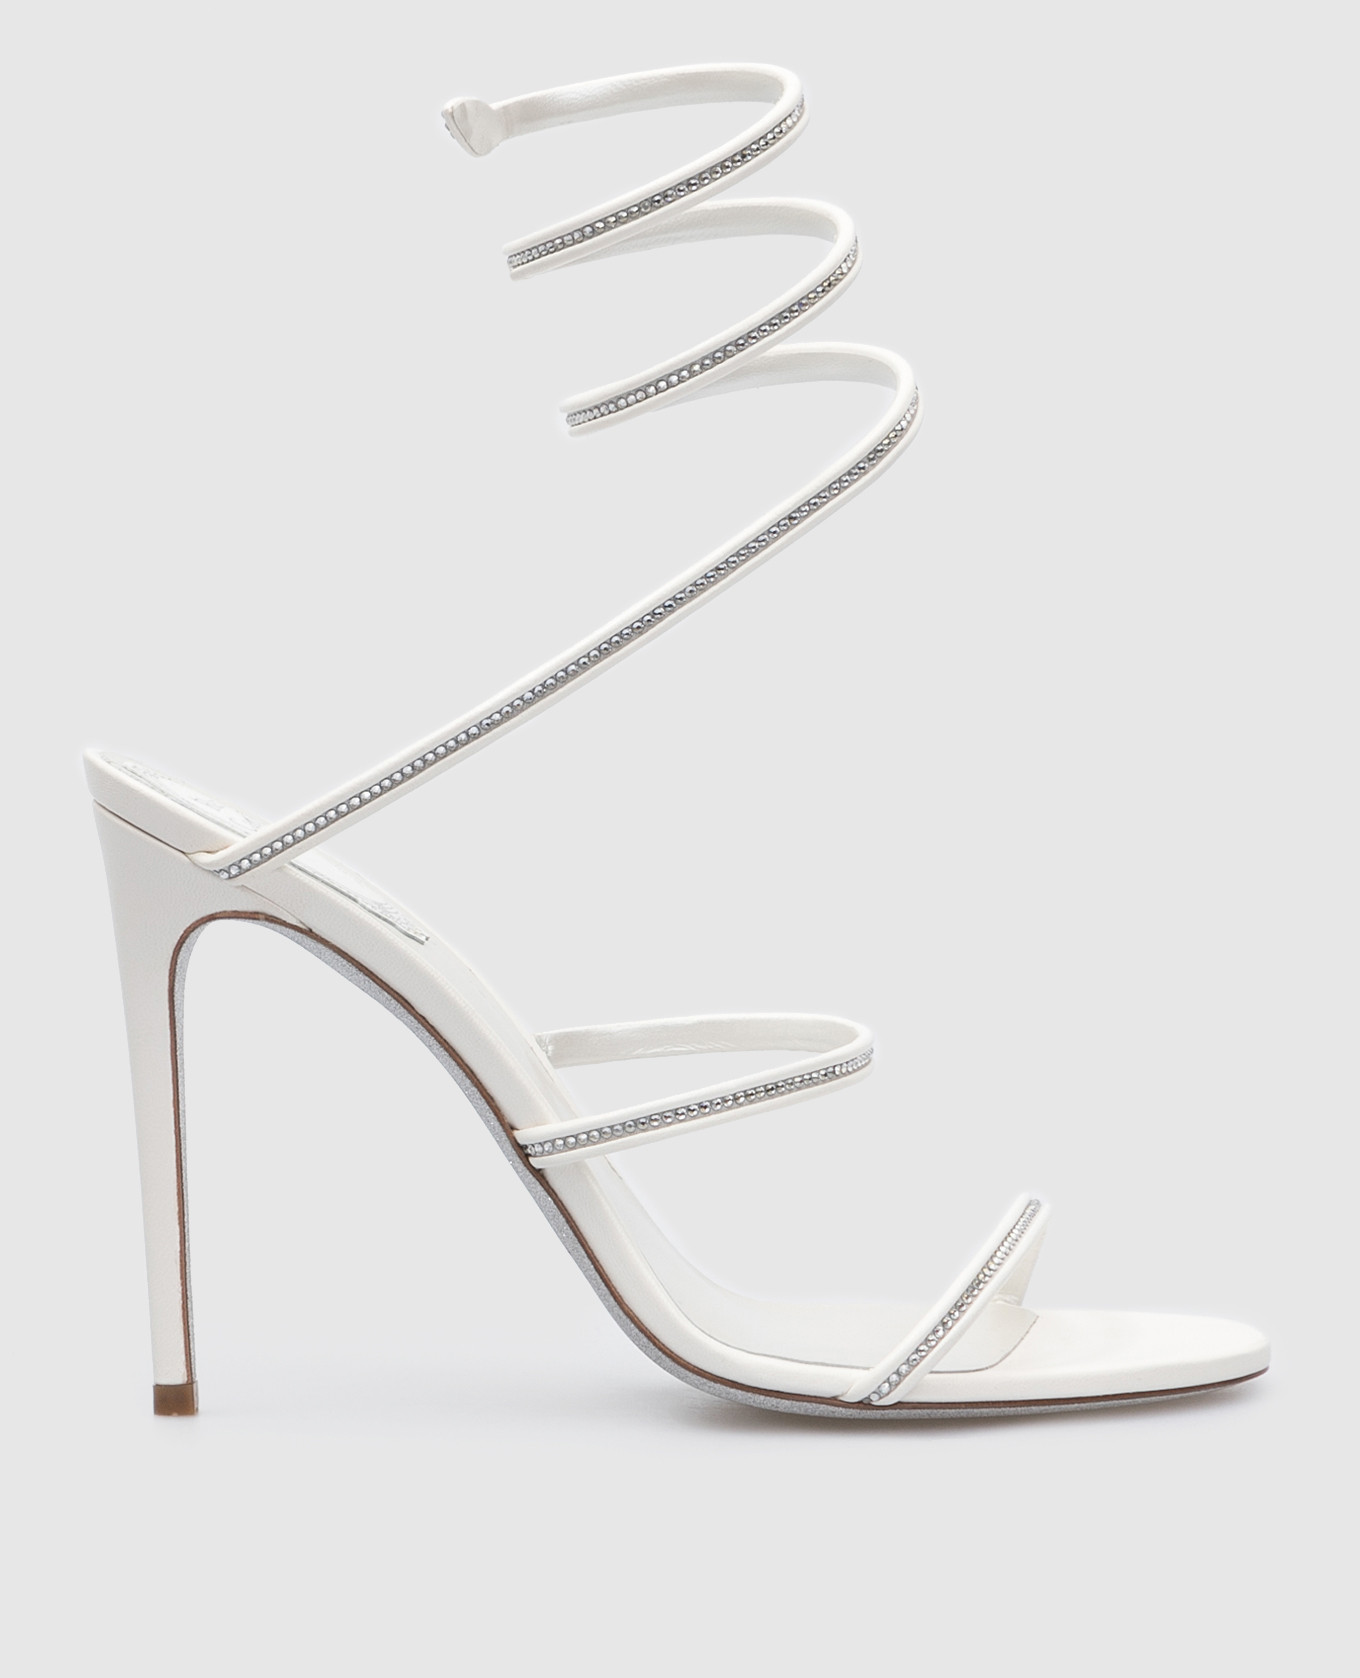 Cleo white leather sandals with crystals